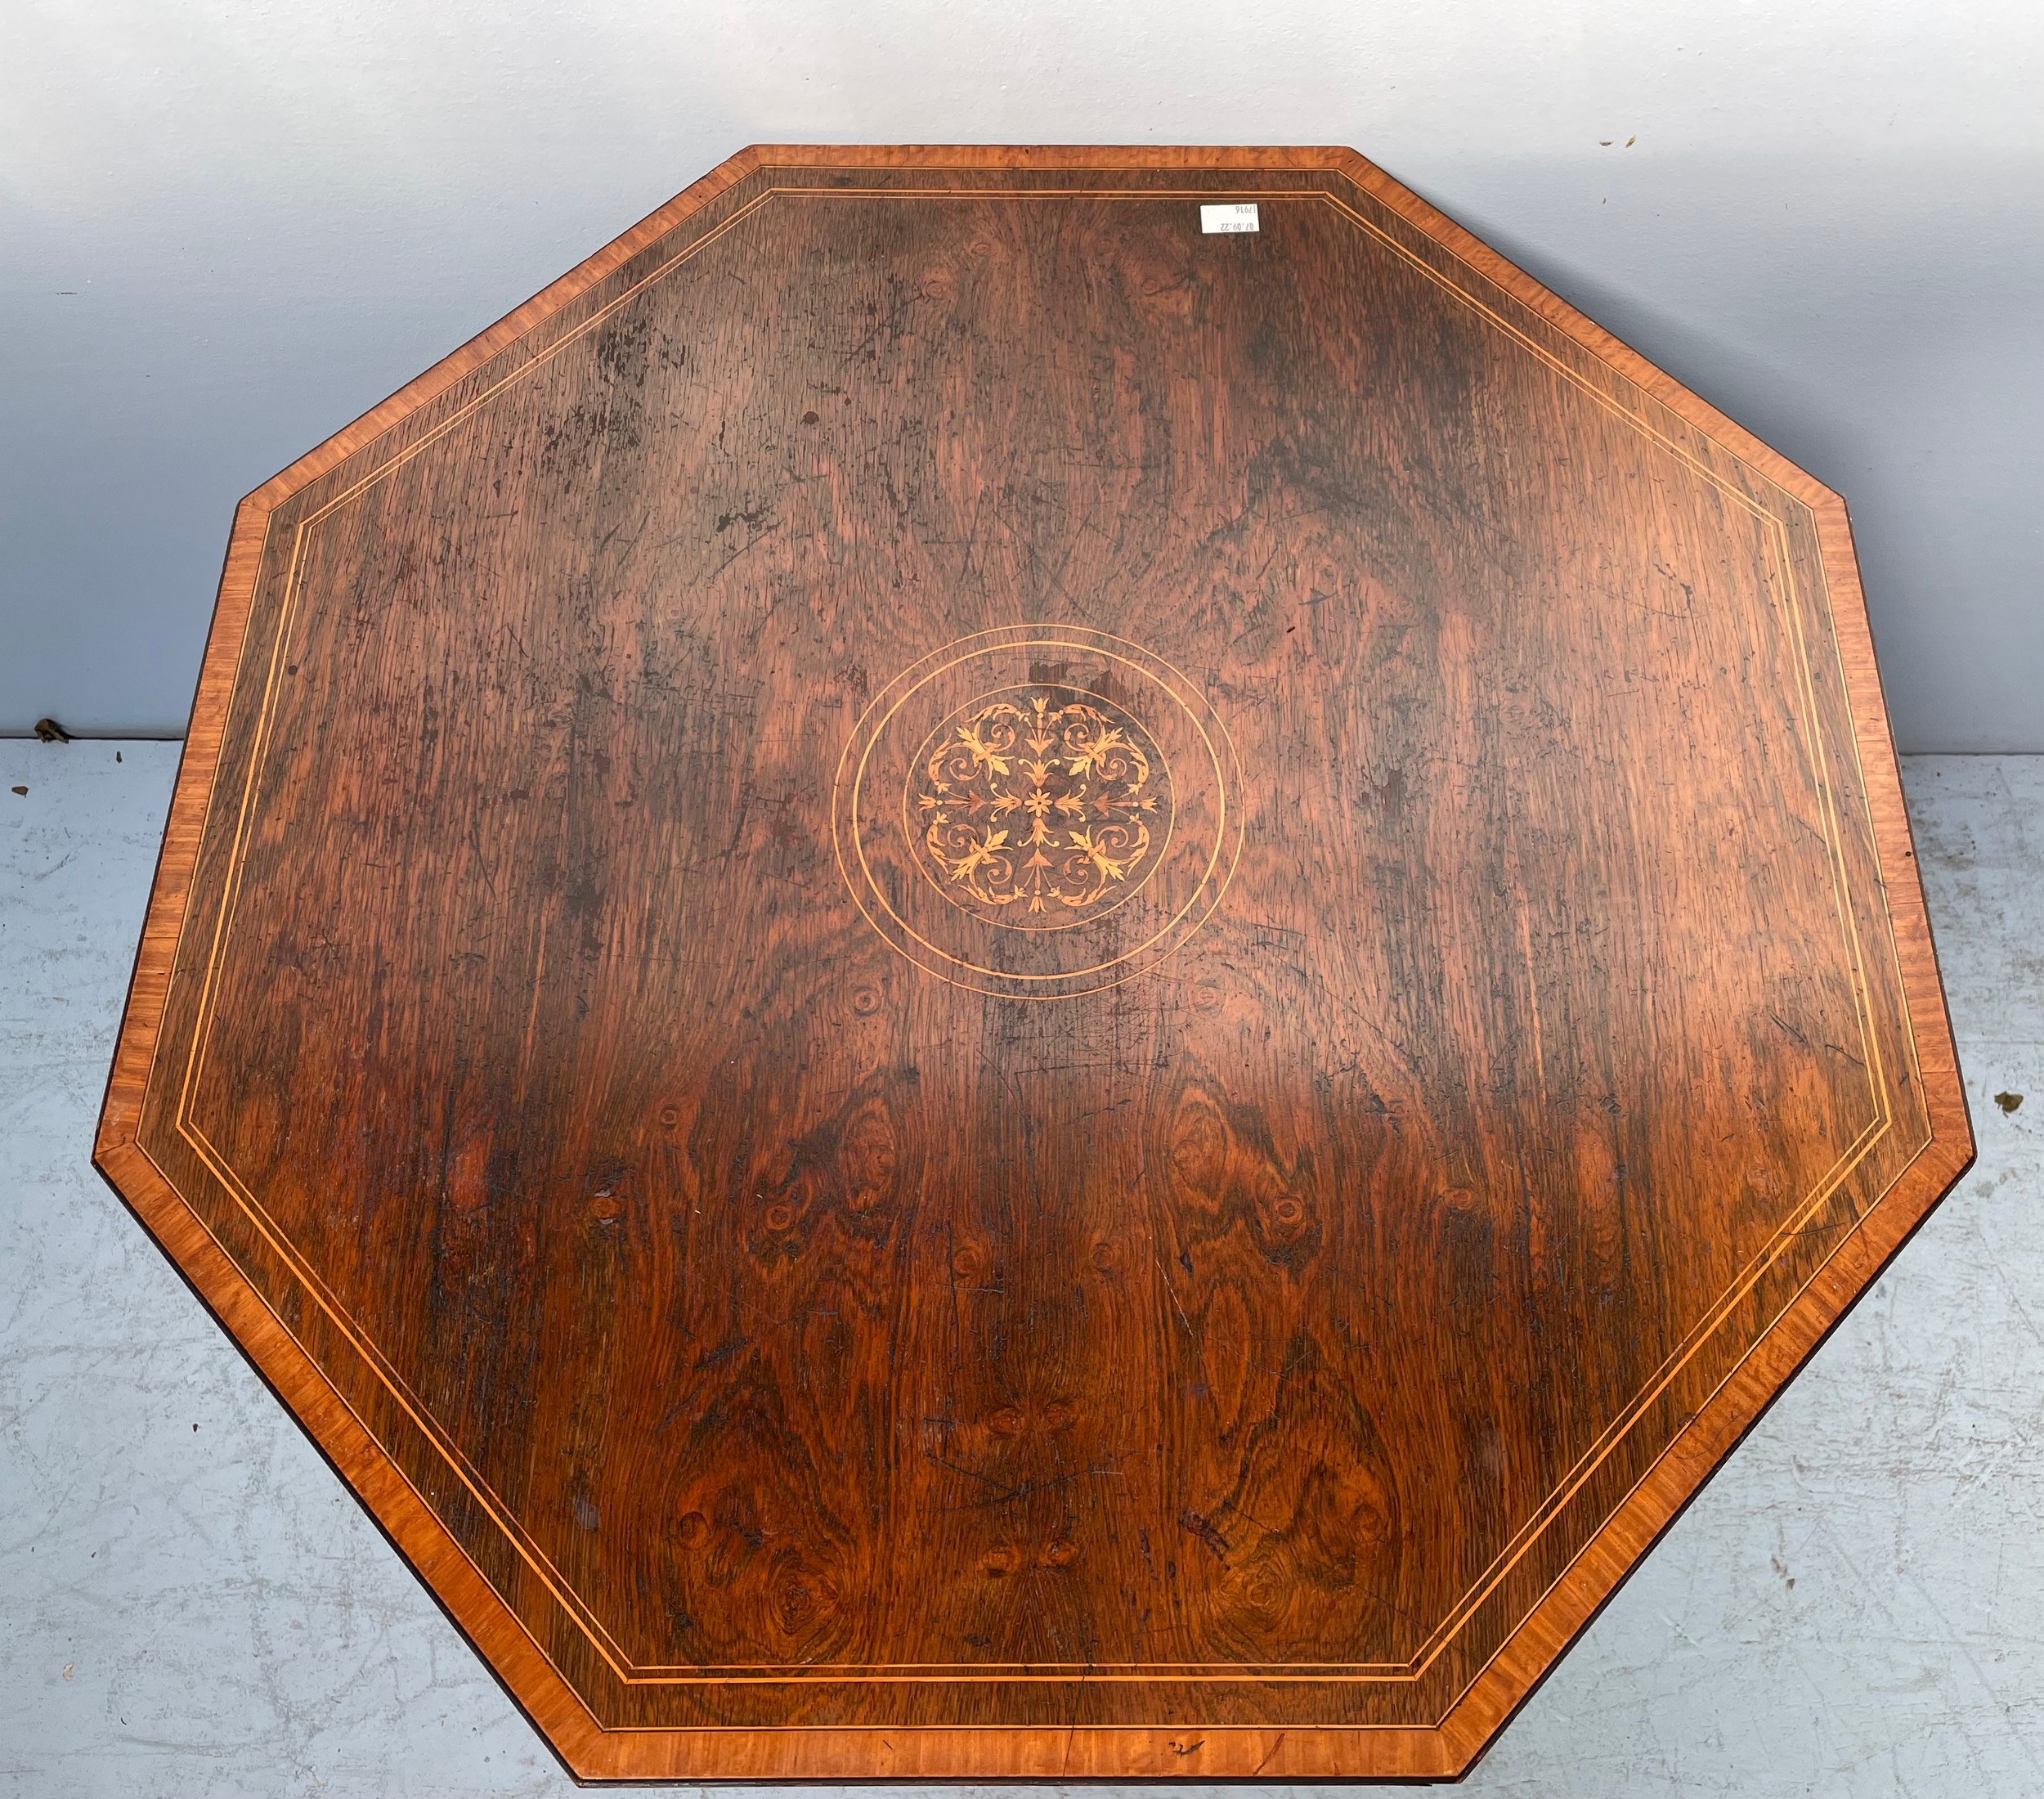 An Edwardian pollard oak veneered octagonal occasional table with central inlaid satinwood, - Image 2 of 7